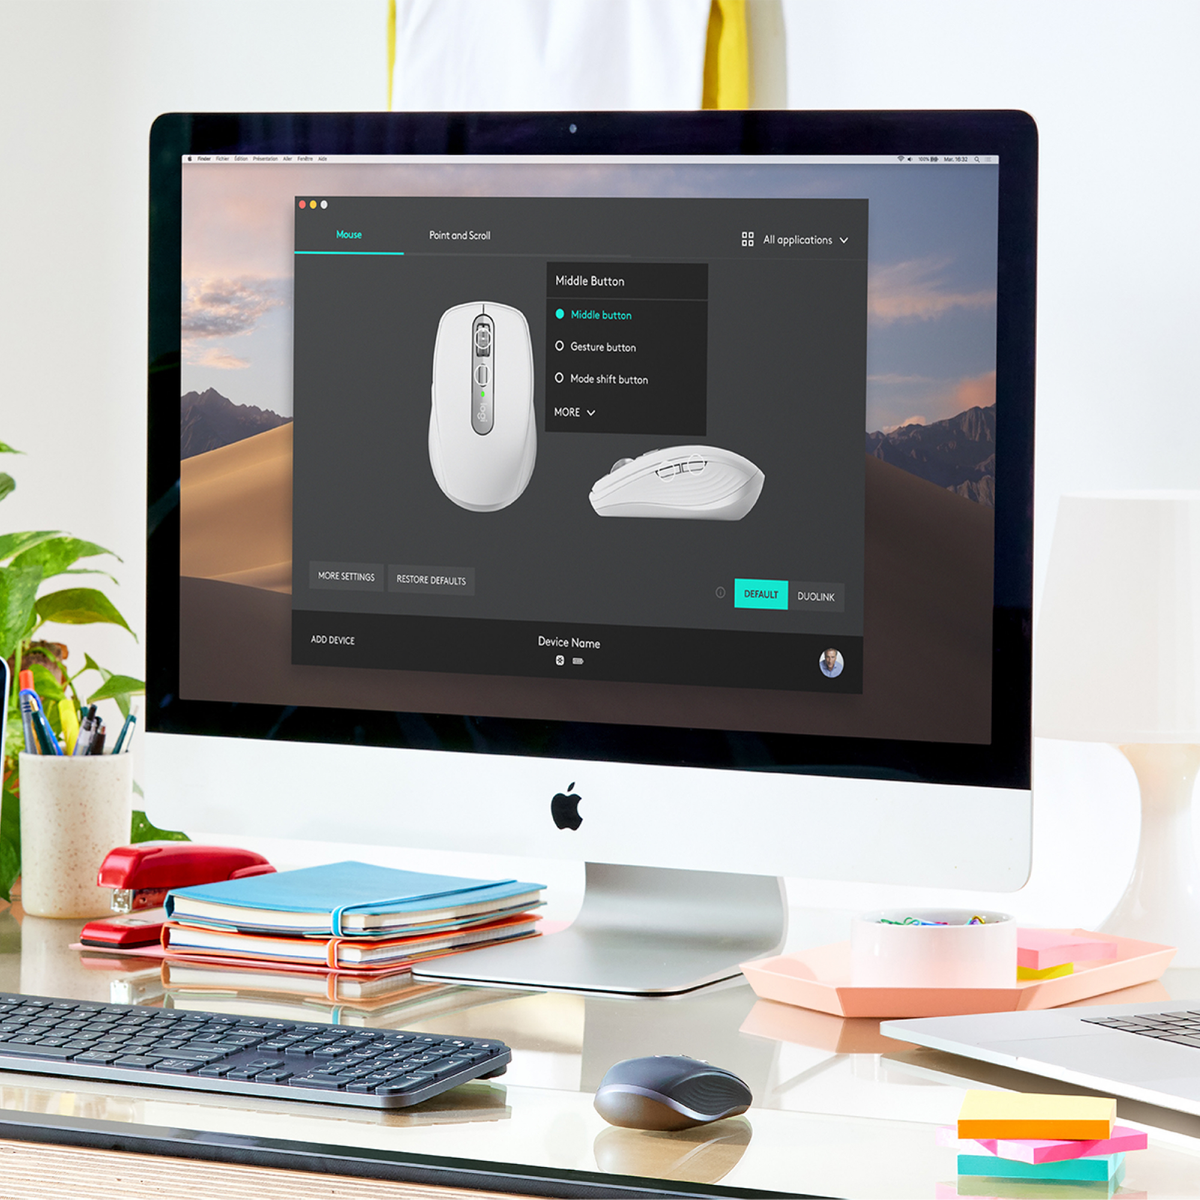 Maus, LOGITECH for Business Weiß Anywhere 3